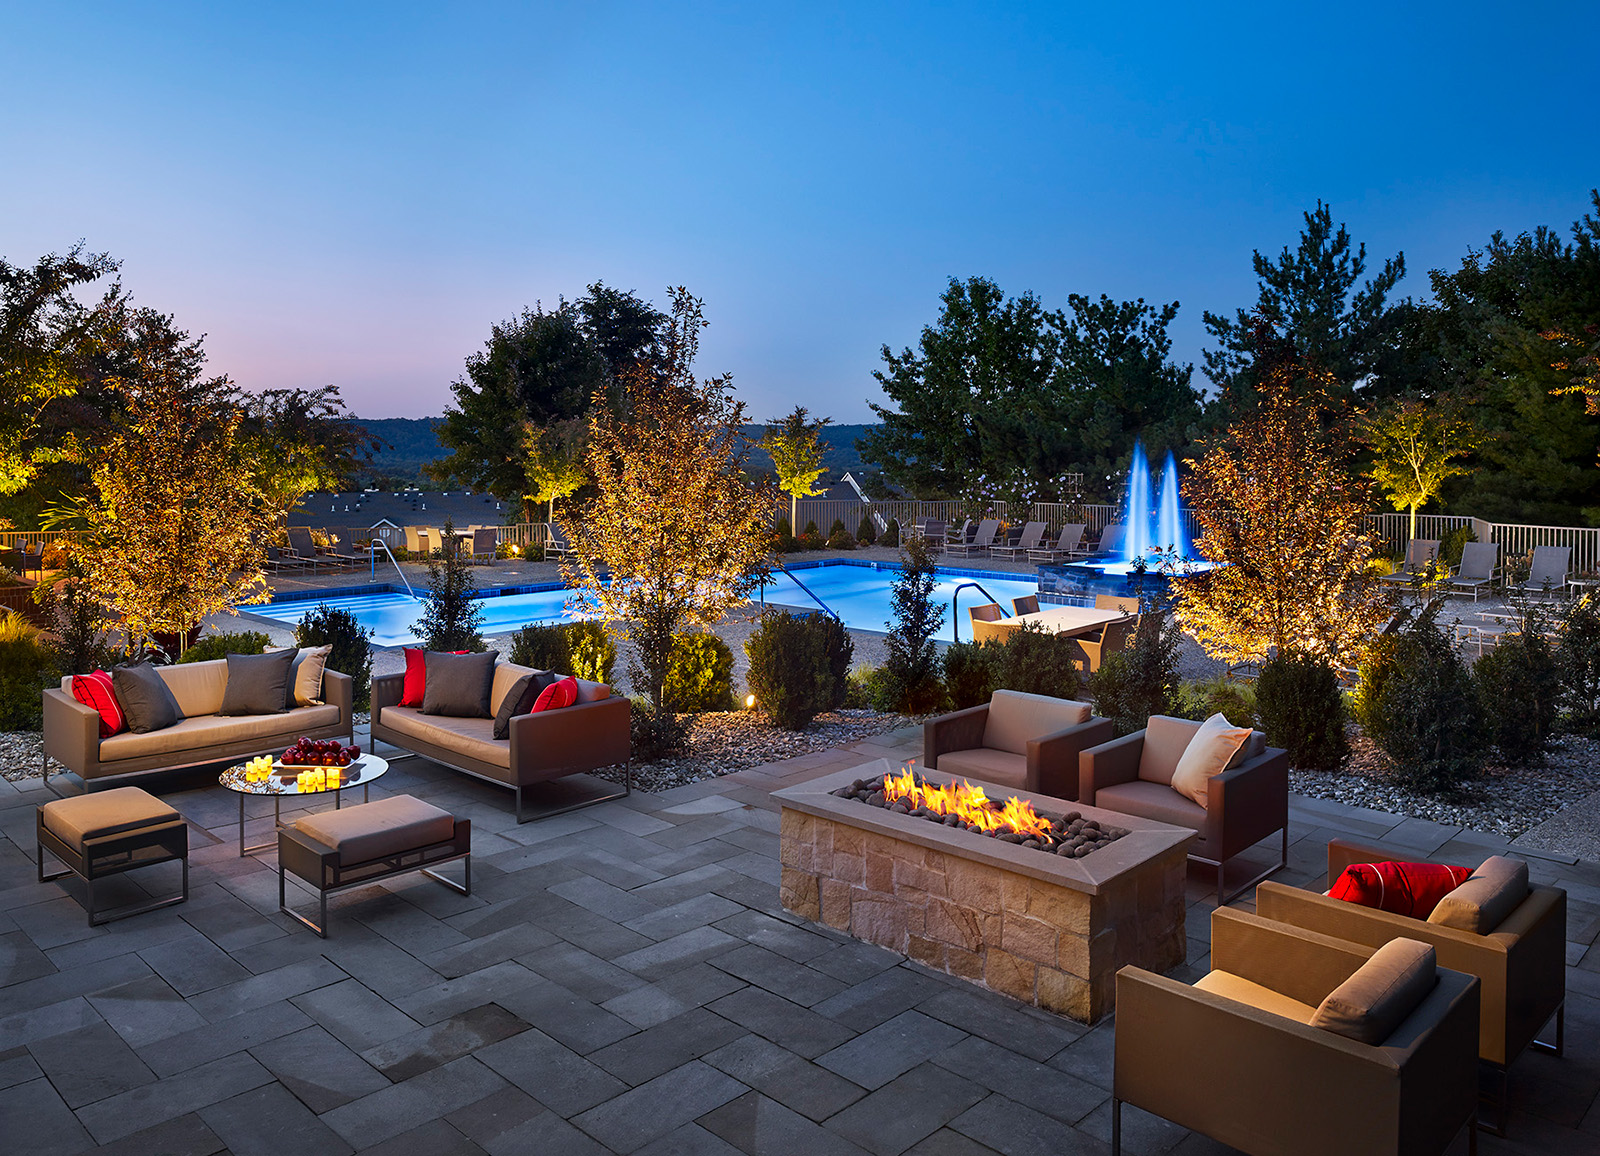 Firepit and lounge chairs in front of pool at night